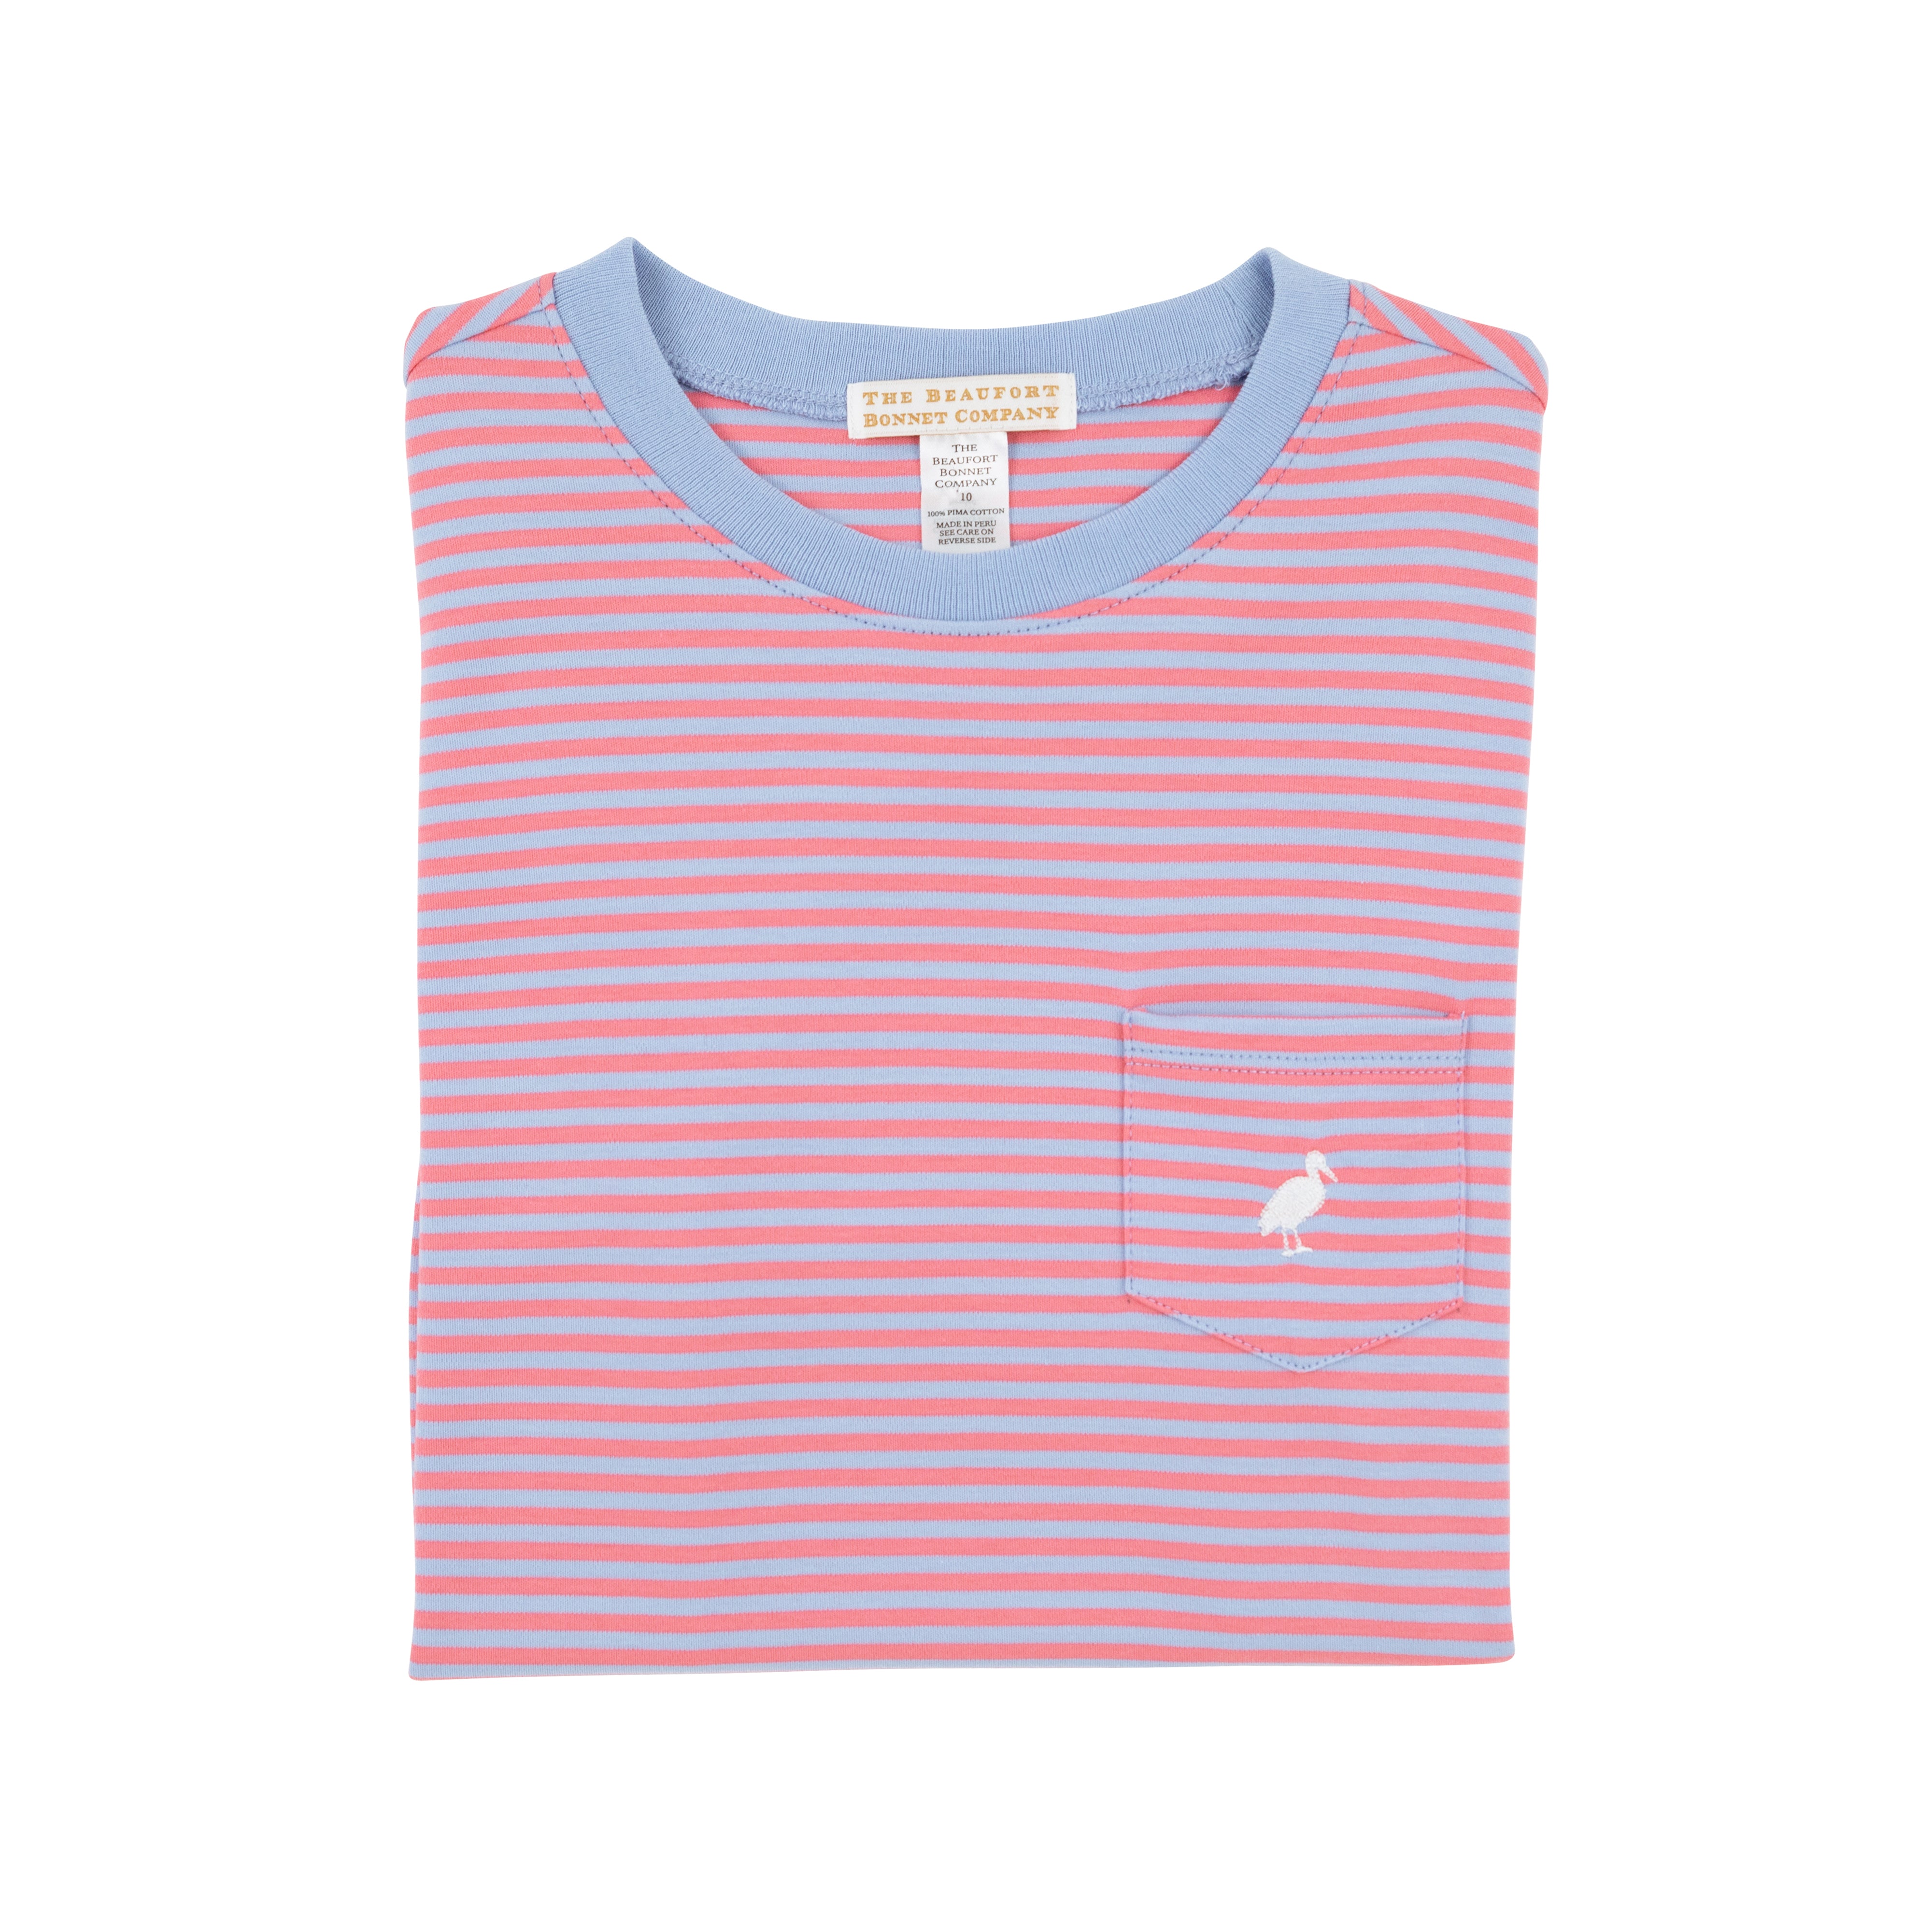 Carter Crewneck - Beale Street Blue & Parrot Cay Coral Stripe with